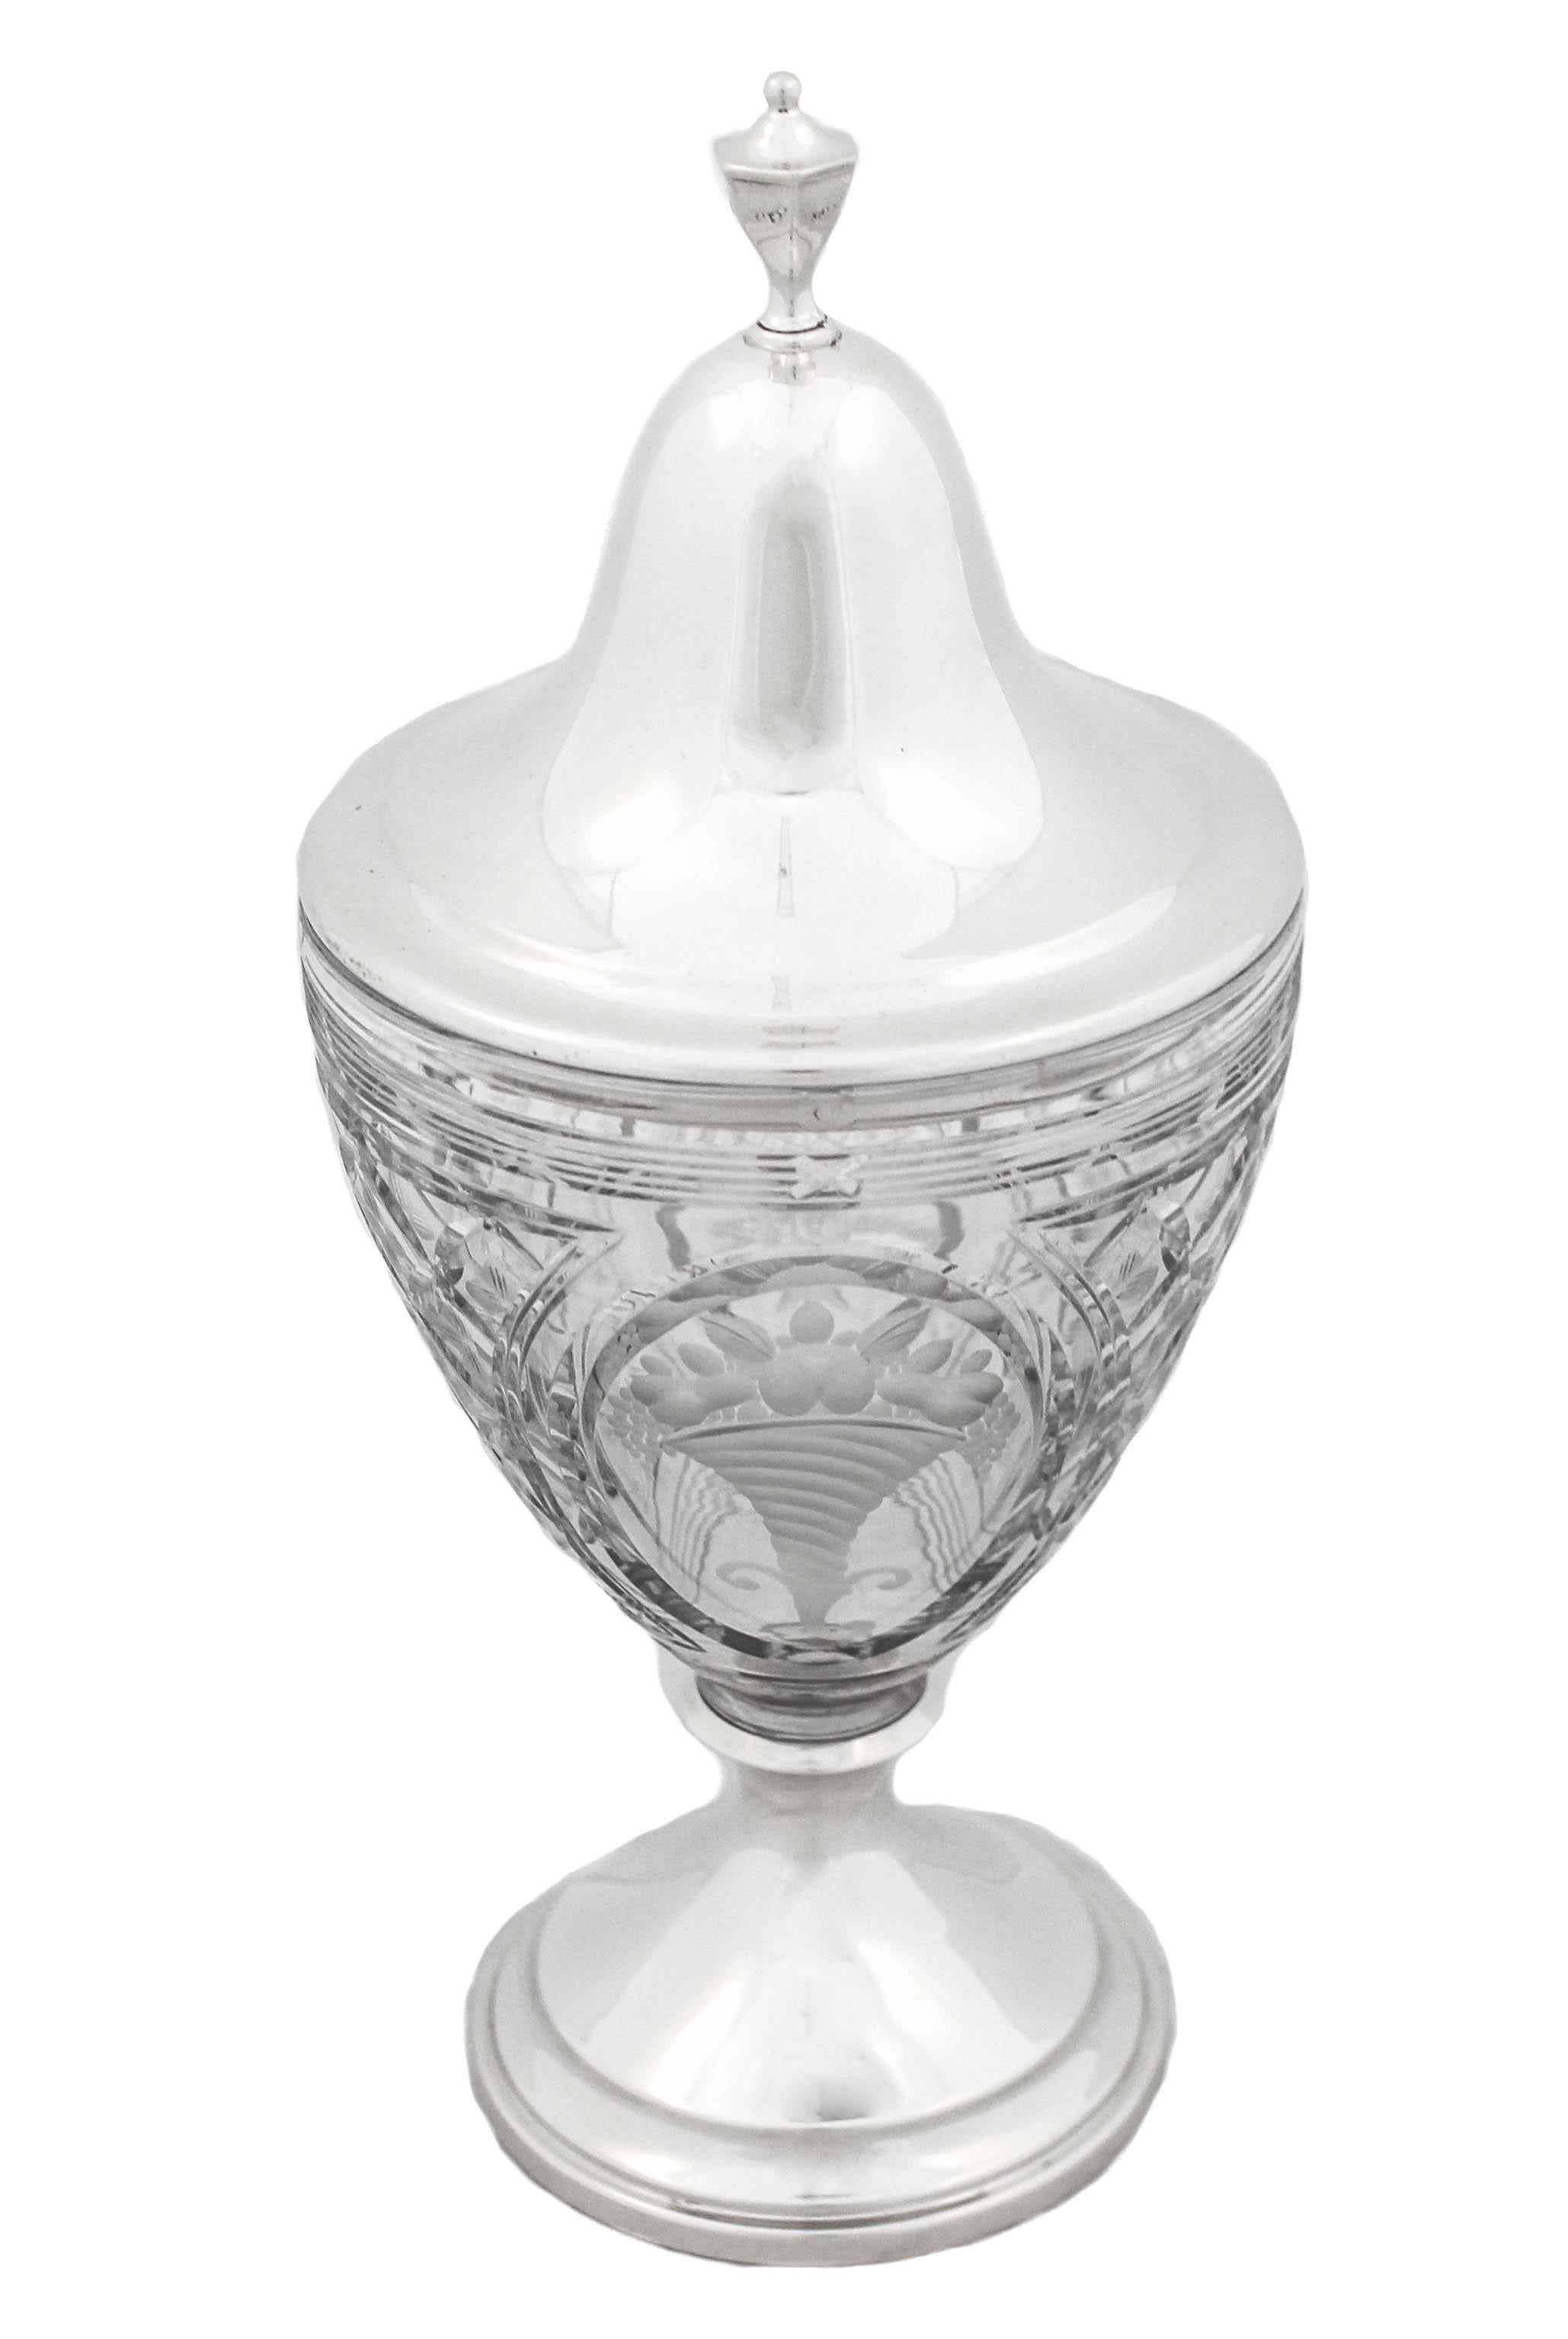 We are delighted to offer you this sterling silver and crystal urn by Frank Whiting Silver Company.  The pedestal and lid are both sterling silver while the urn is cut glass in a diamond pattern.  There is on both sides of the urn acid etched